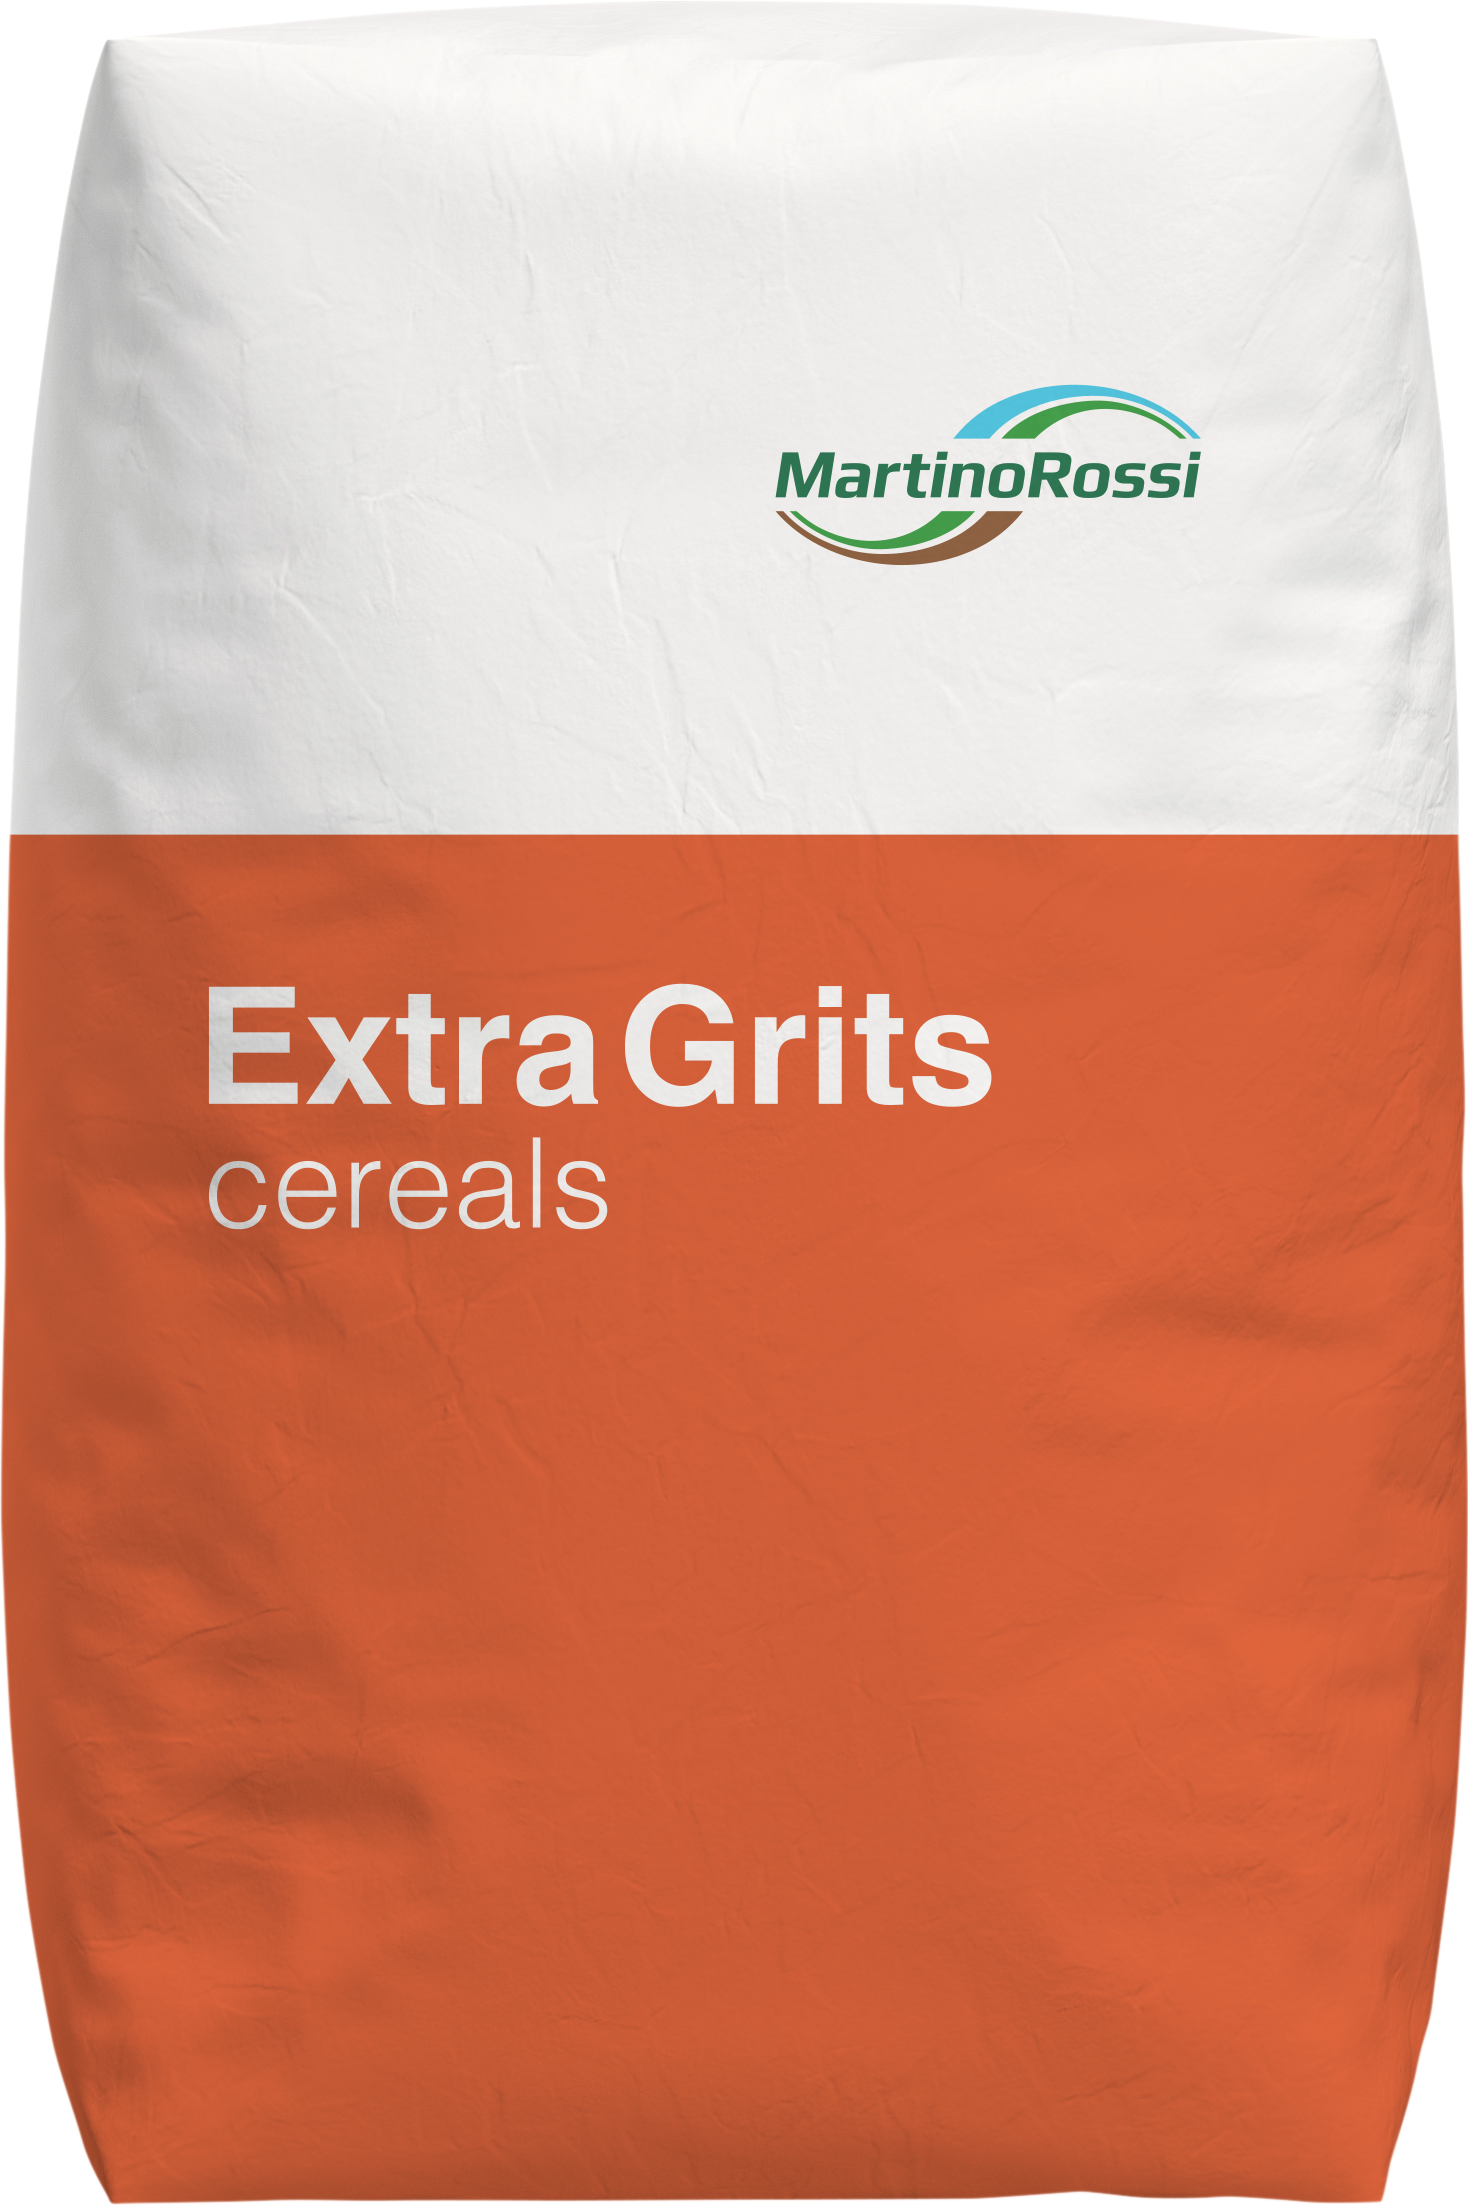 EXTRA GRITS Cereals